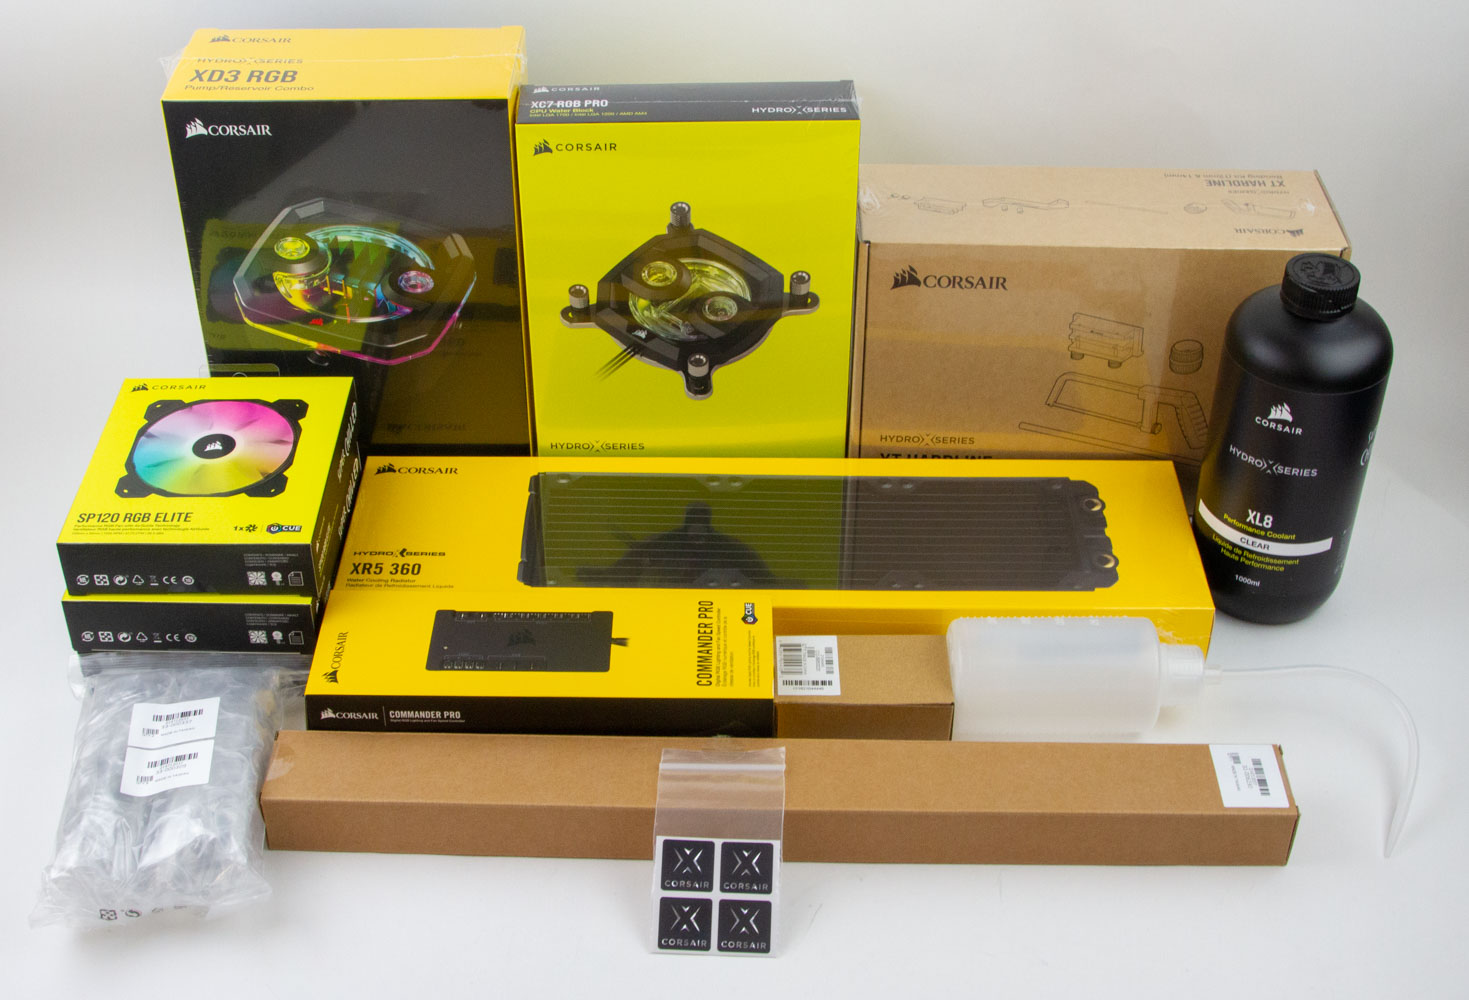 Unboxing Corsair Commander Pro - Digital RGB Lighting and Fan Speed  Controller 